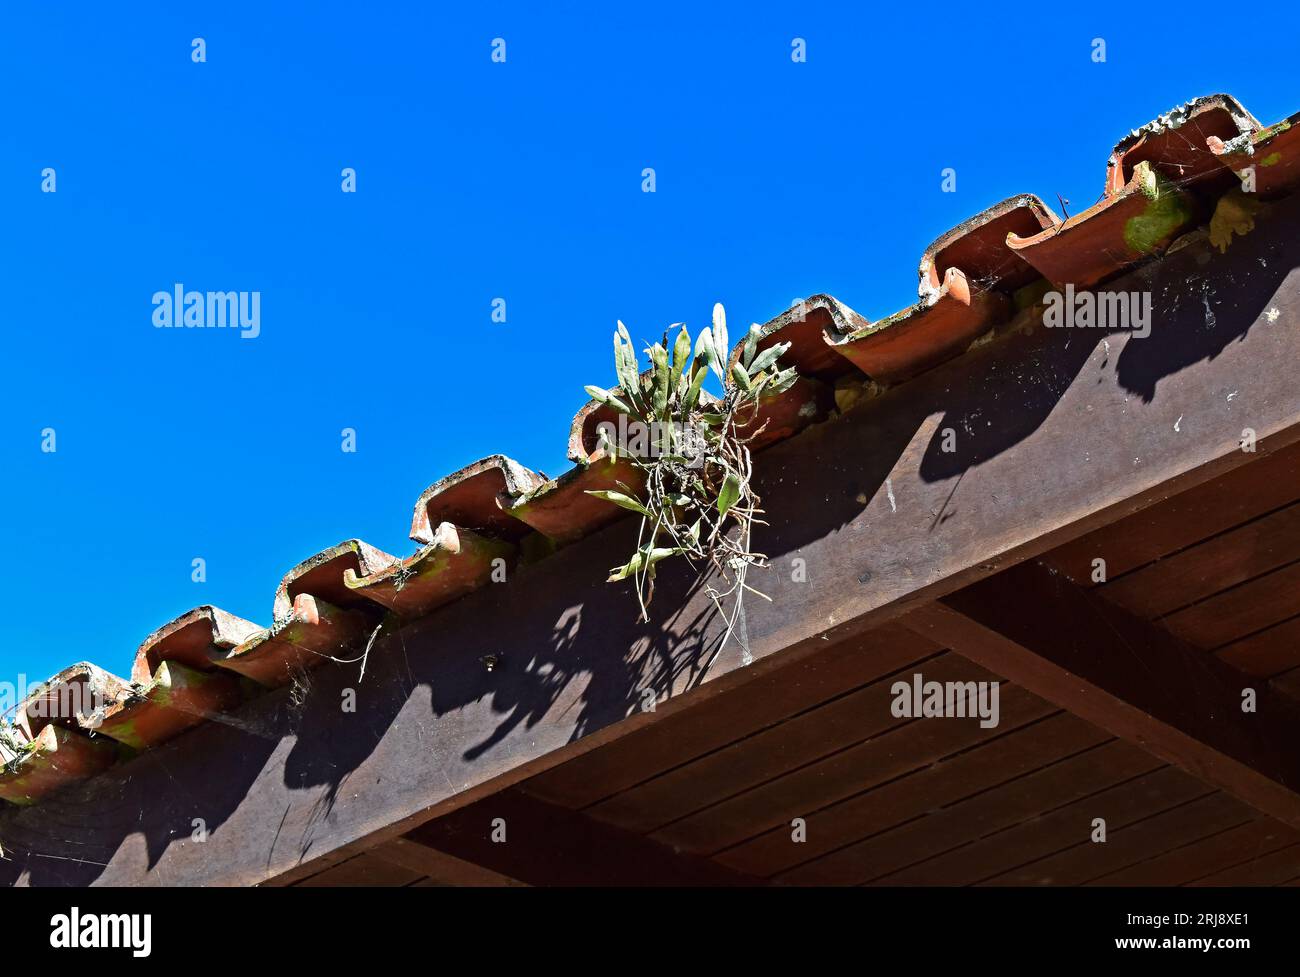 Vine ferns or snakeferns on tree trunk (Microgramma squamulosa) on the edge of the roof Stock Photo